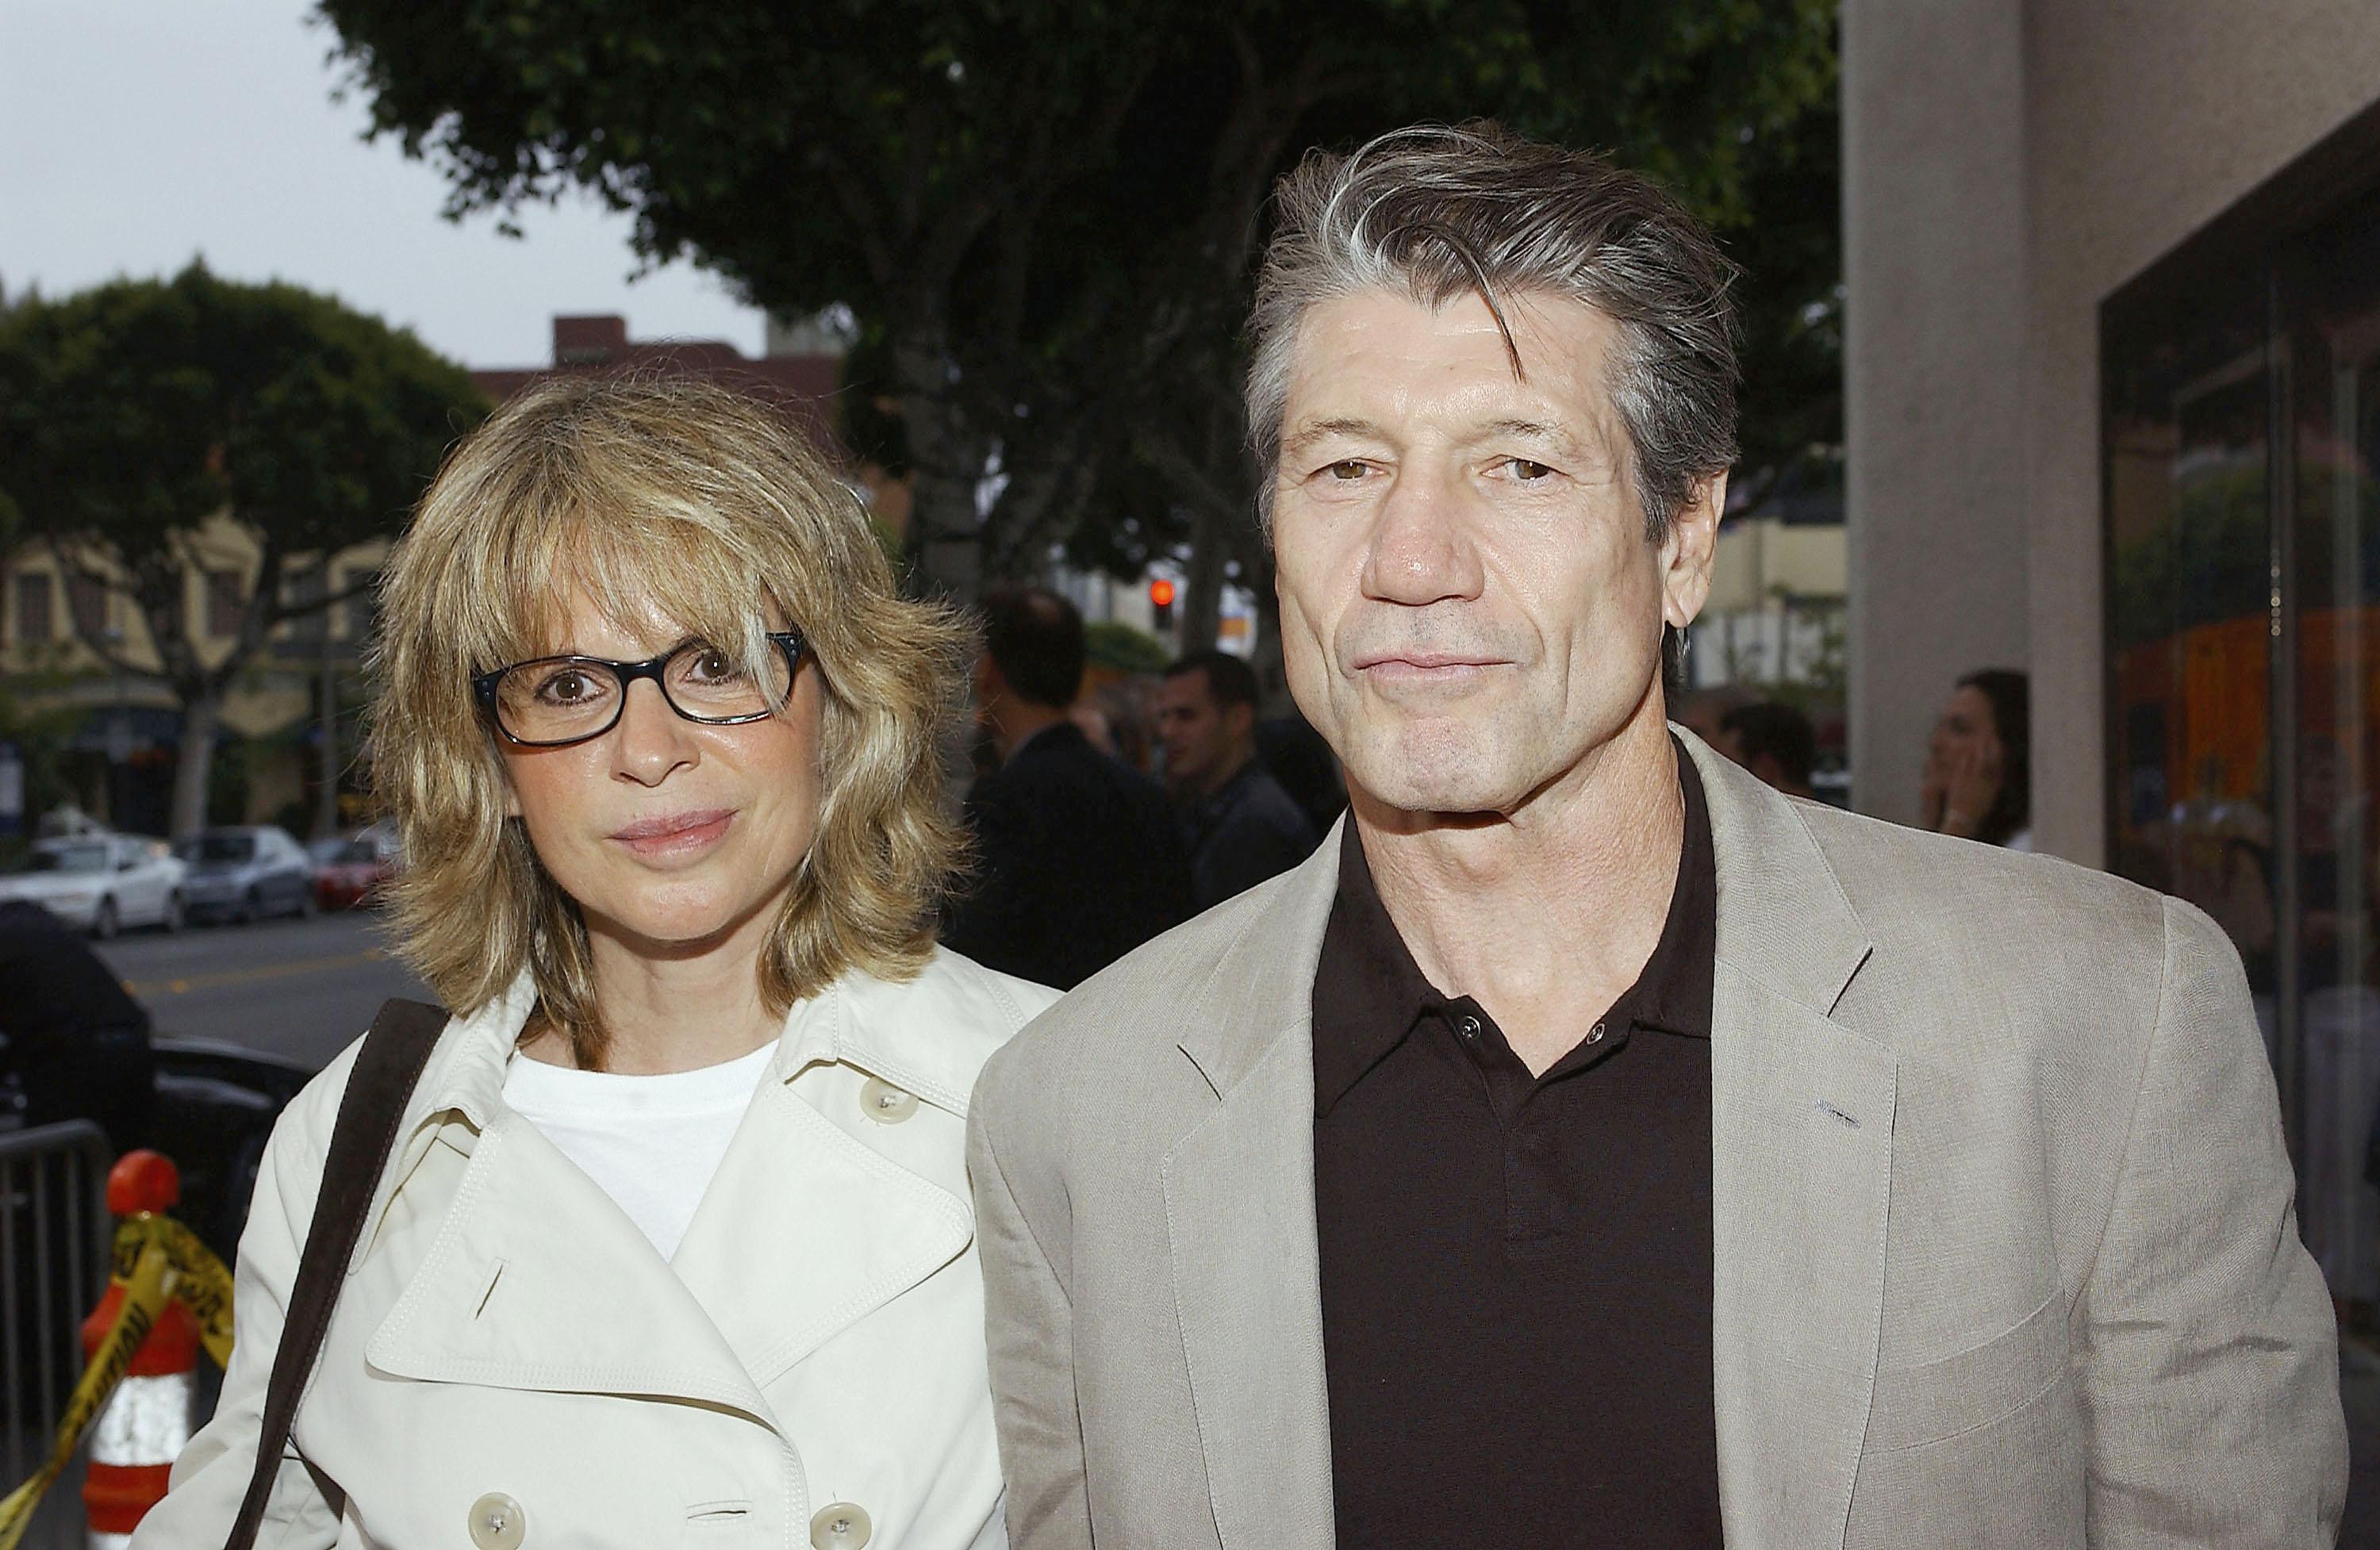 Marie-France Ward and Fred Ward at the premiere of "10.5" on April 28, 2004, in Santa Monica, California. | Source: Getty Images